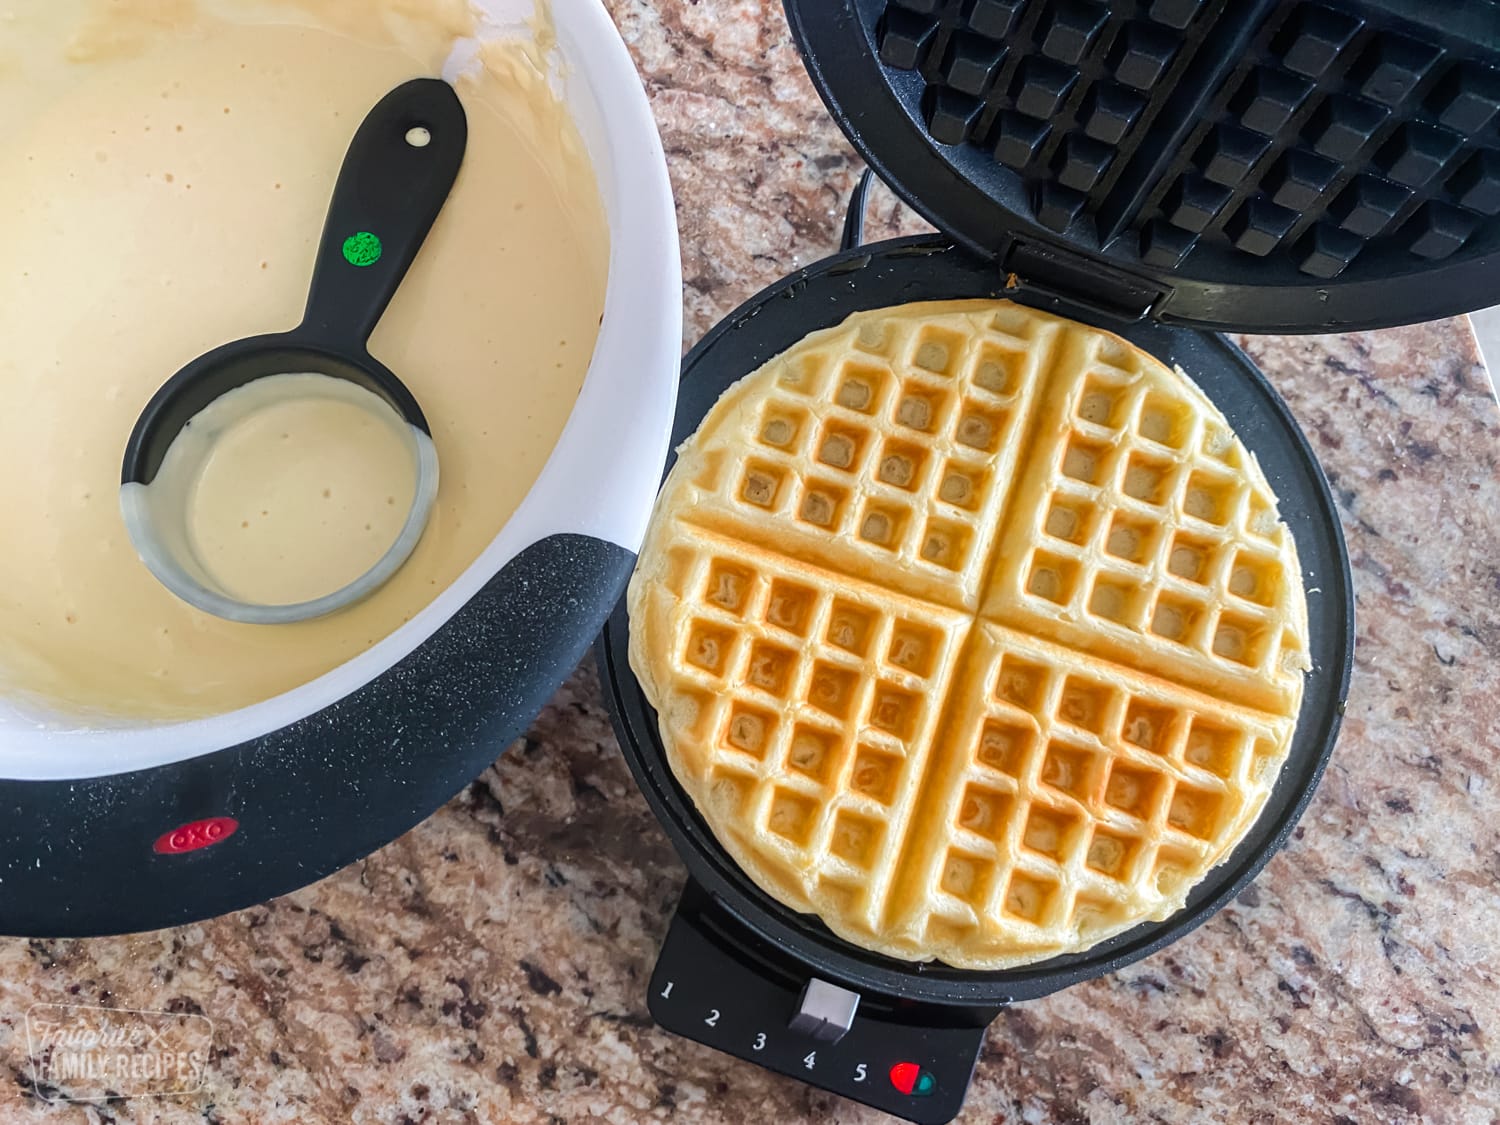 Waffle being cooked in a waffle iron